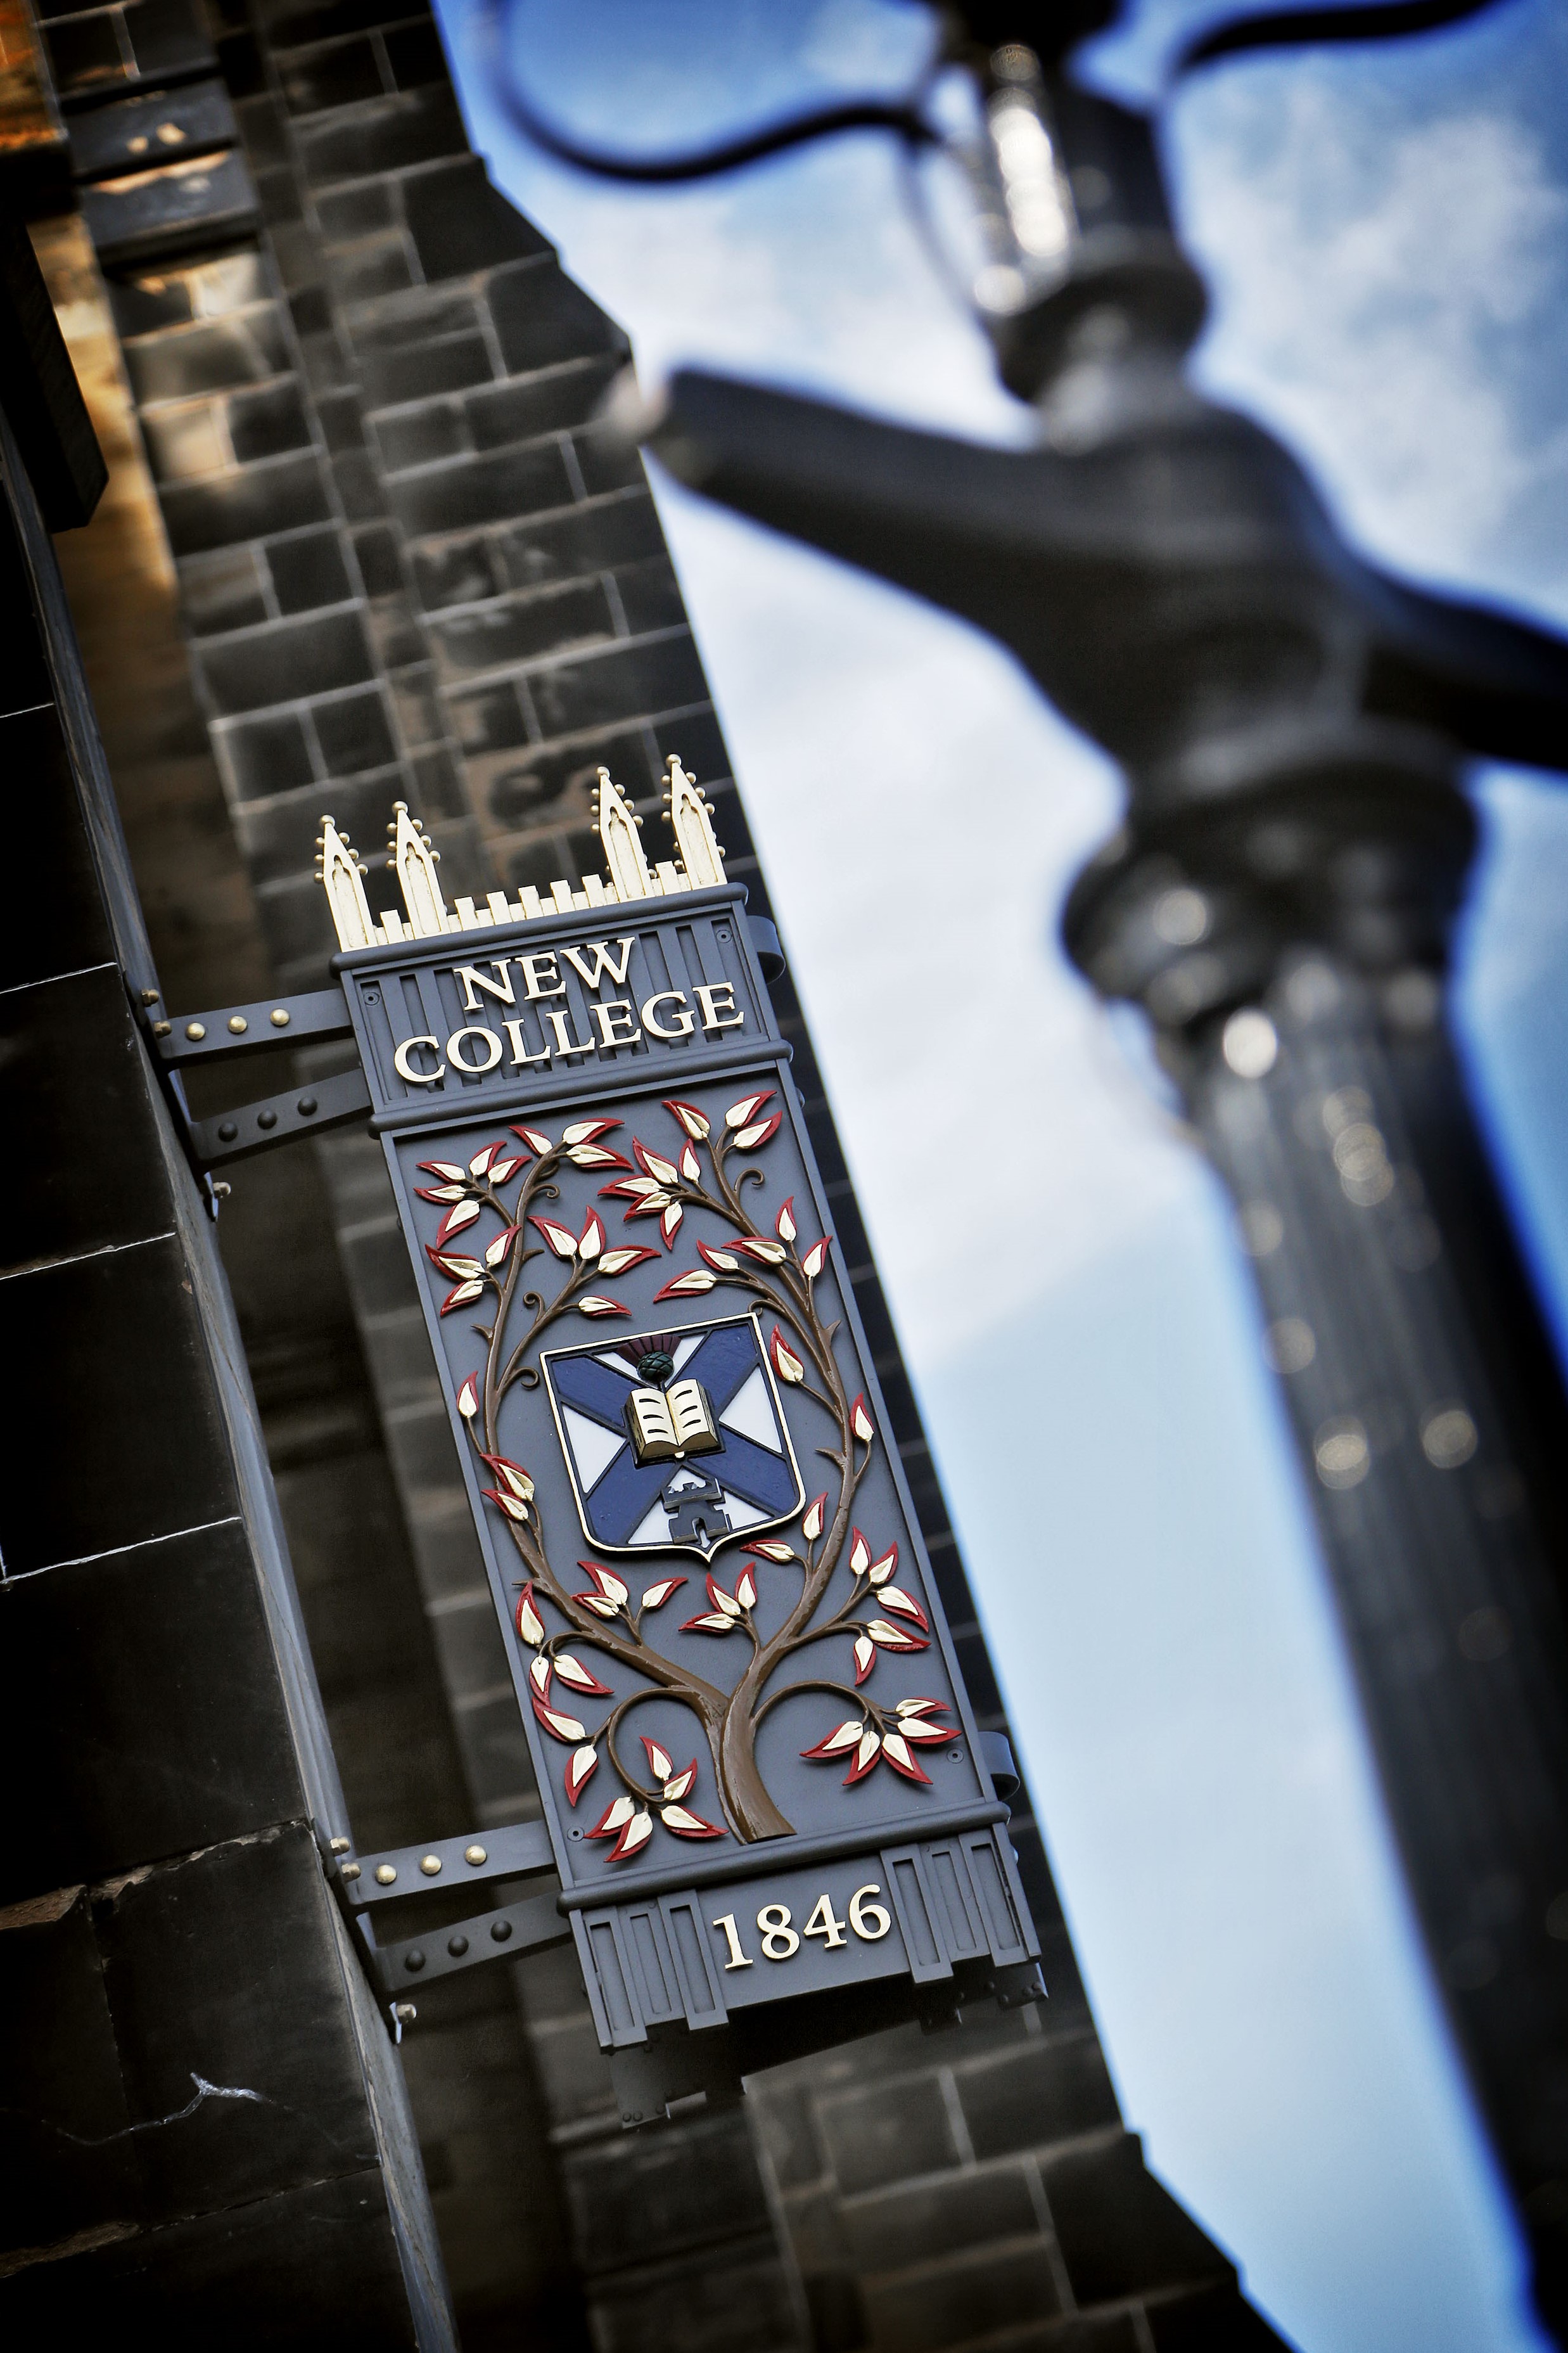 Colour photo of the New College sign